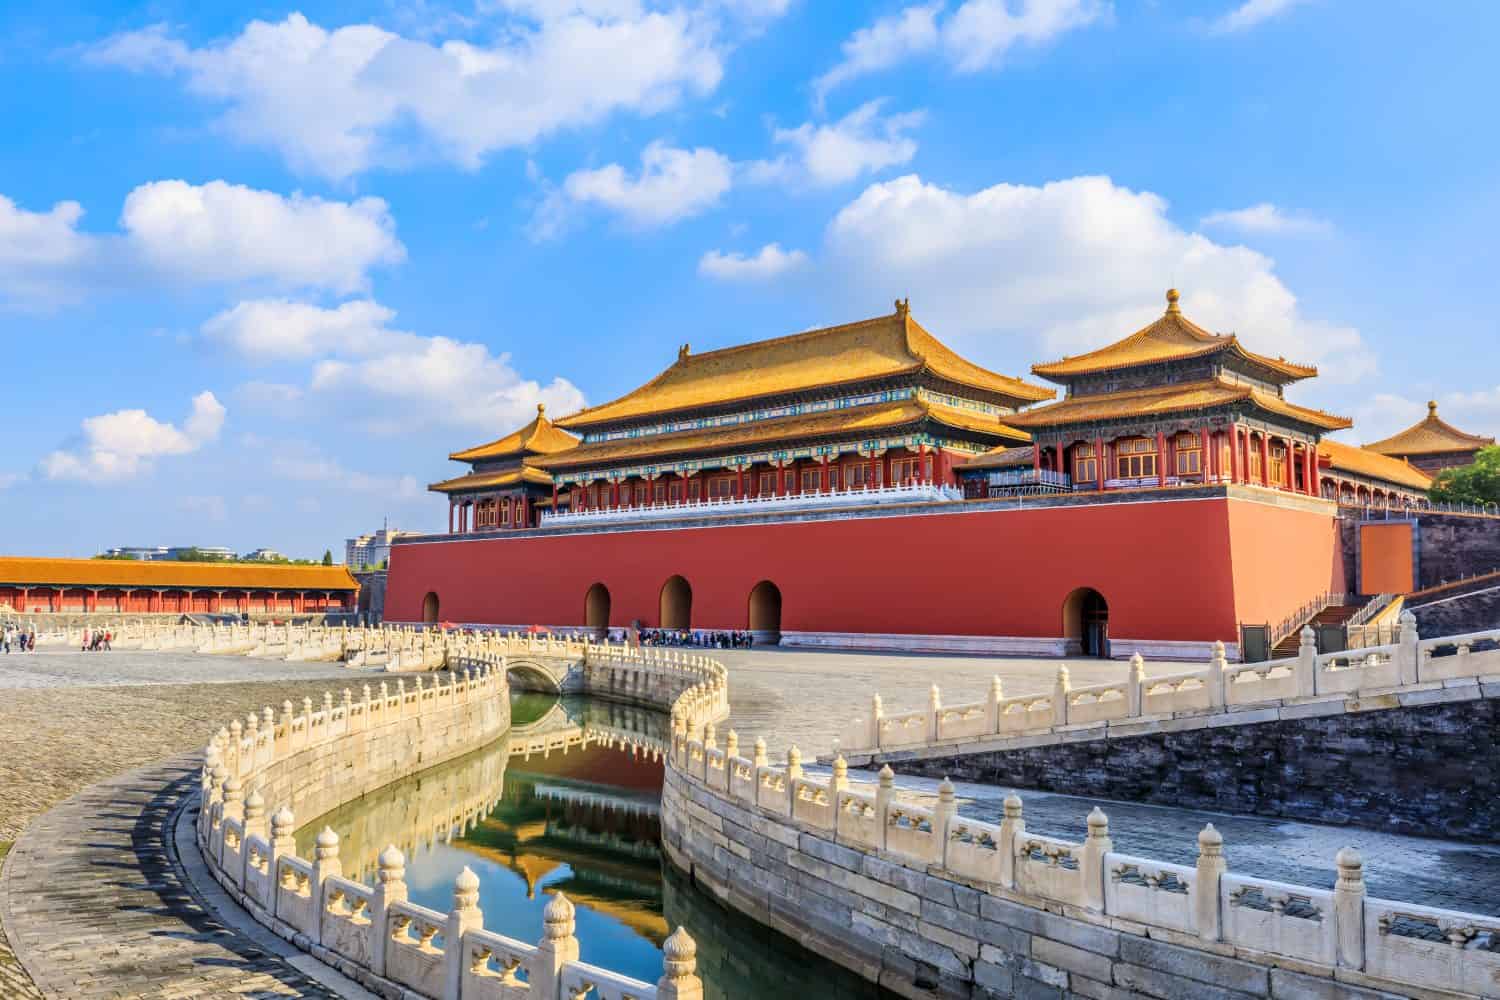 Forbidden City, ancient Chinese royal palace, world famous historical building in Beijing, China.